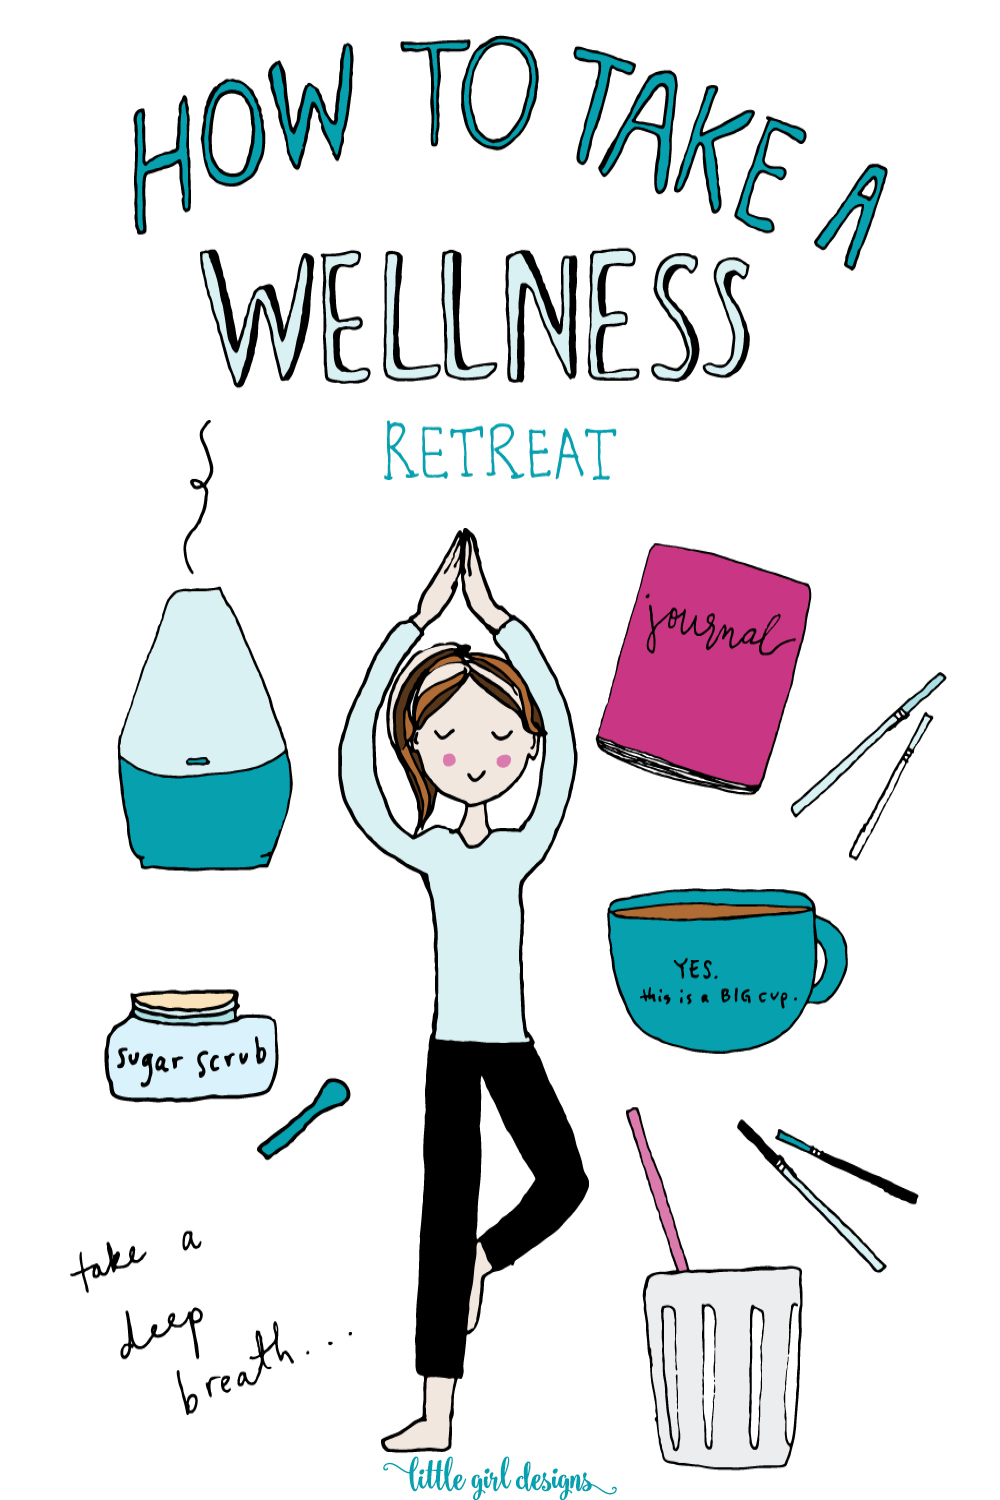 Yes, please! I need a personal retreat, and I love this idea to make my own. Wellness and health are important to me because if I don't take care of me, who will?! Still, it's hard to prioritize taking this time for myself sometimes. Love these ideas and that I can do them at home. :)